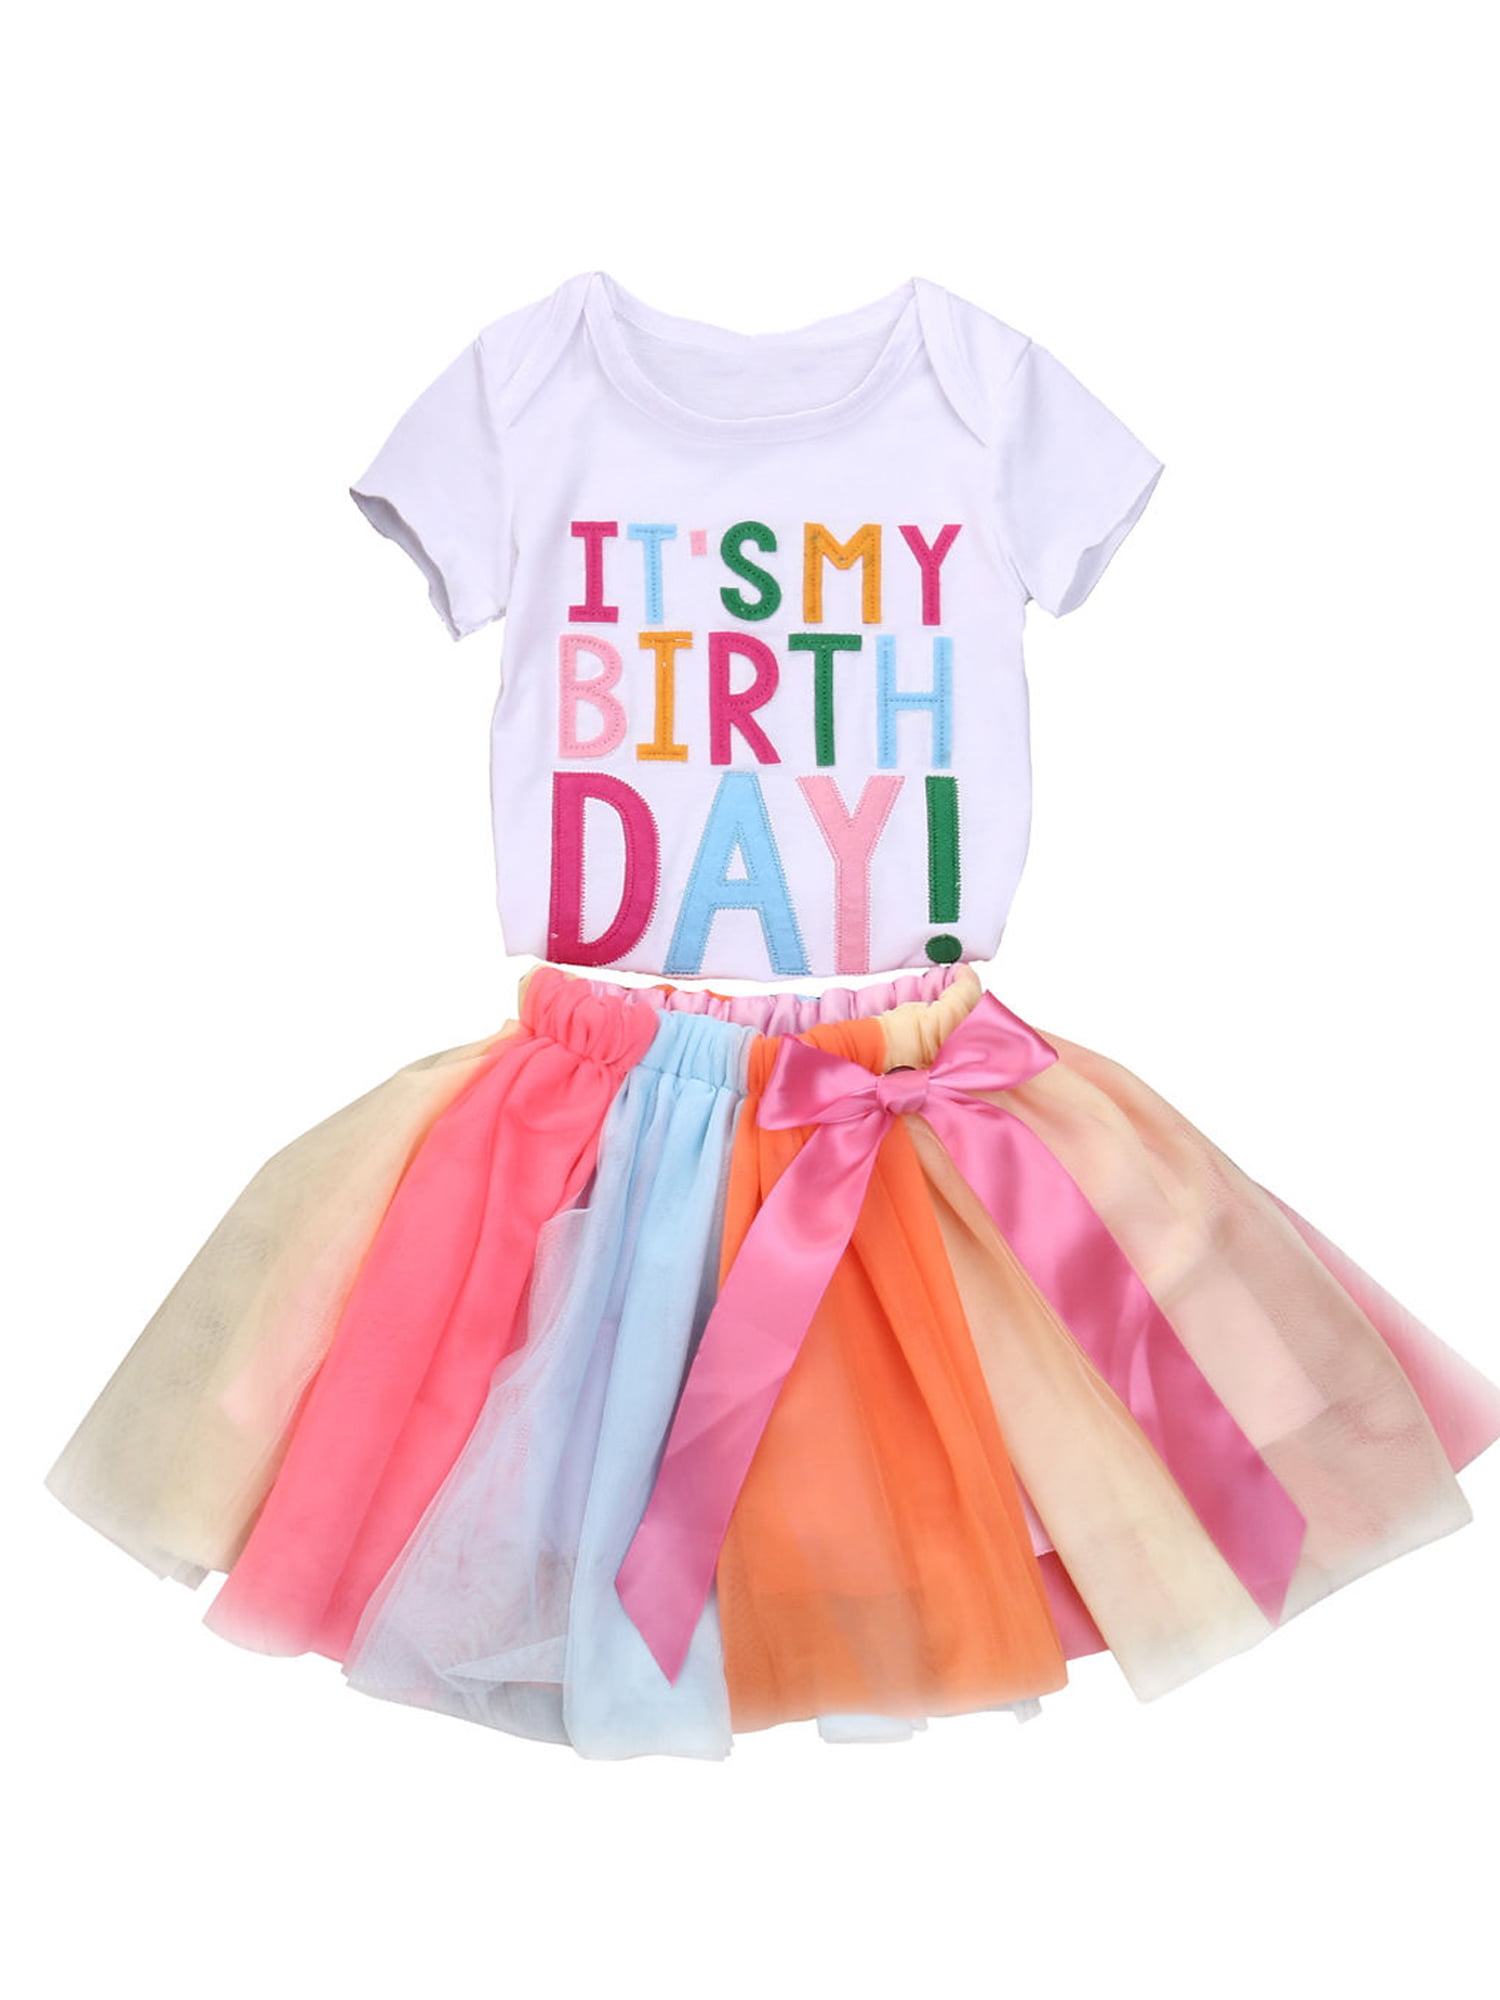 Baby Kids Girls Birthday Clothes Outfit Bow Tutu Skirt Dress+Top Shirt Party Set 